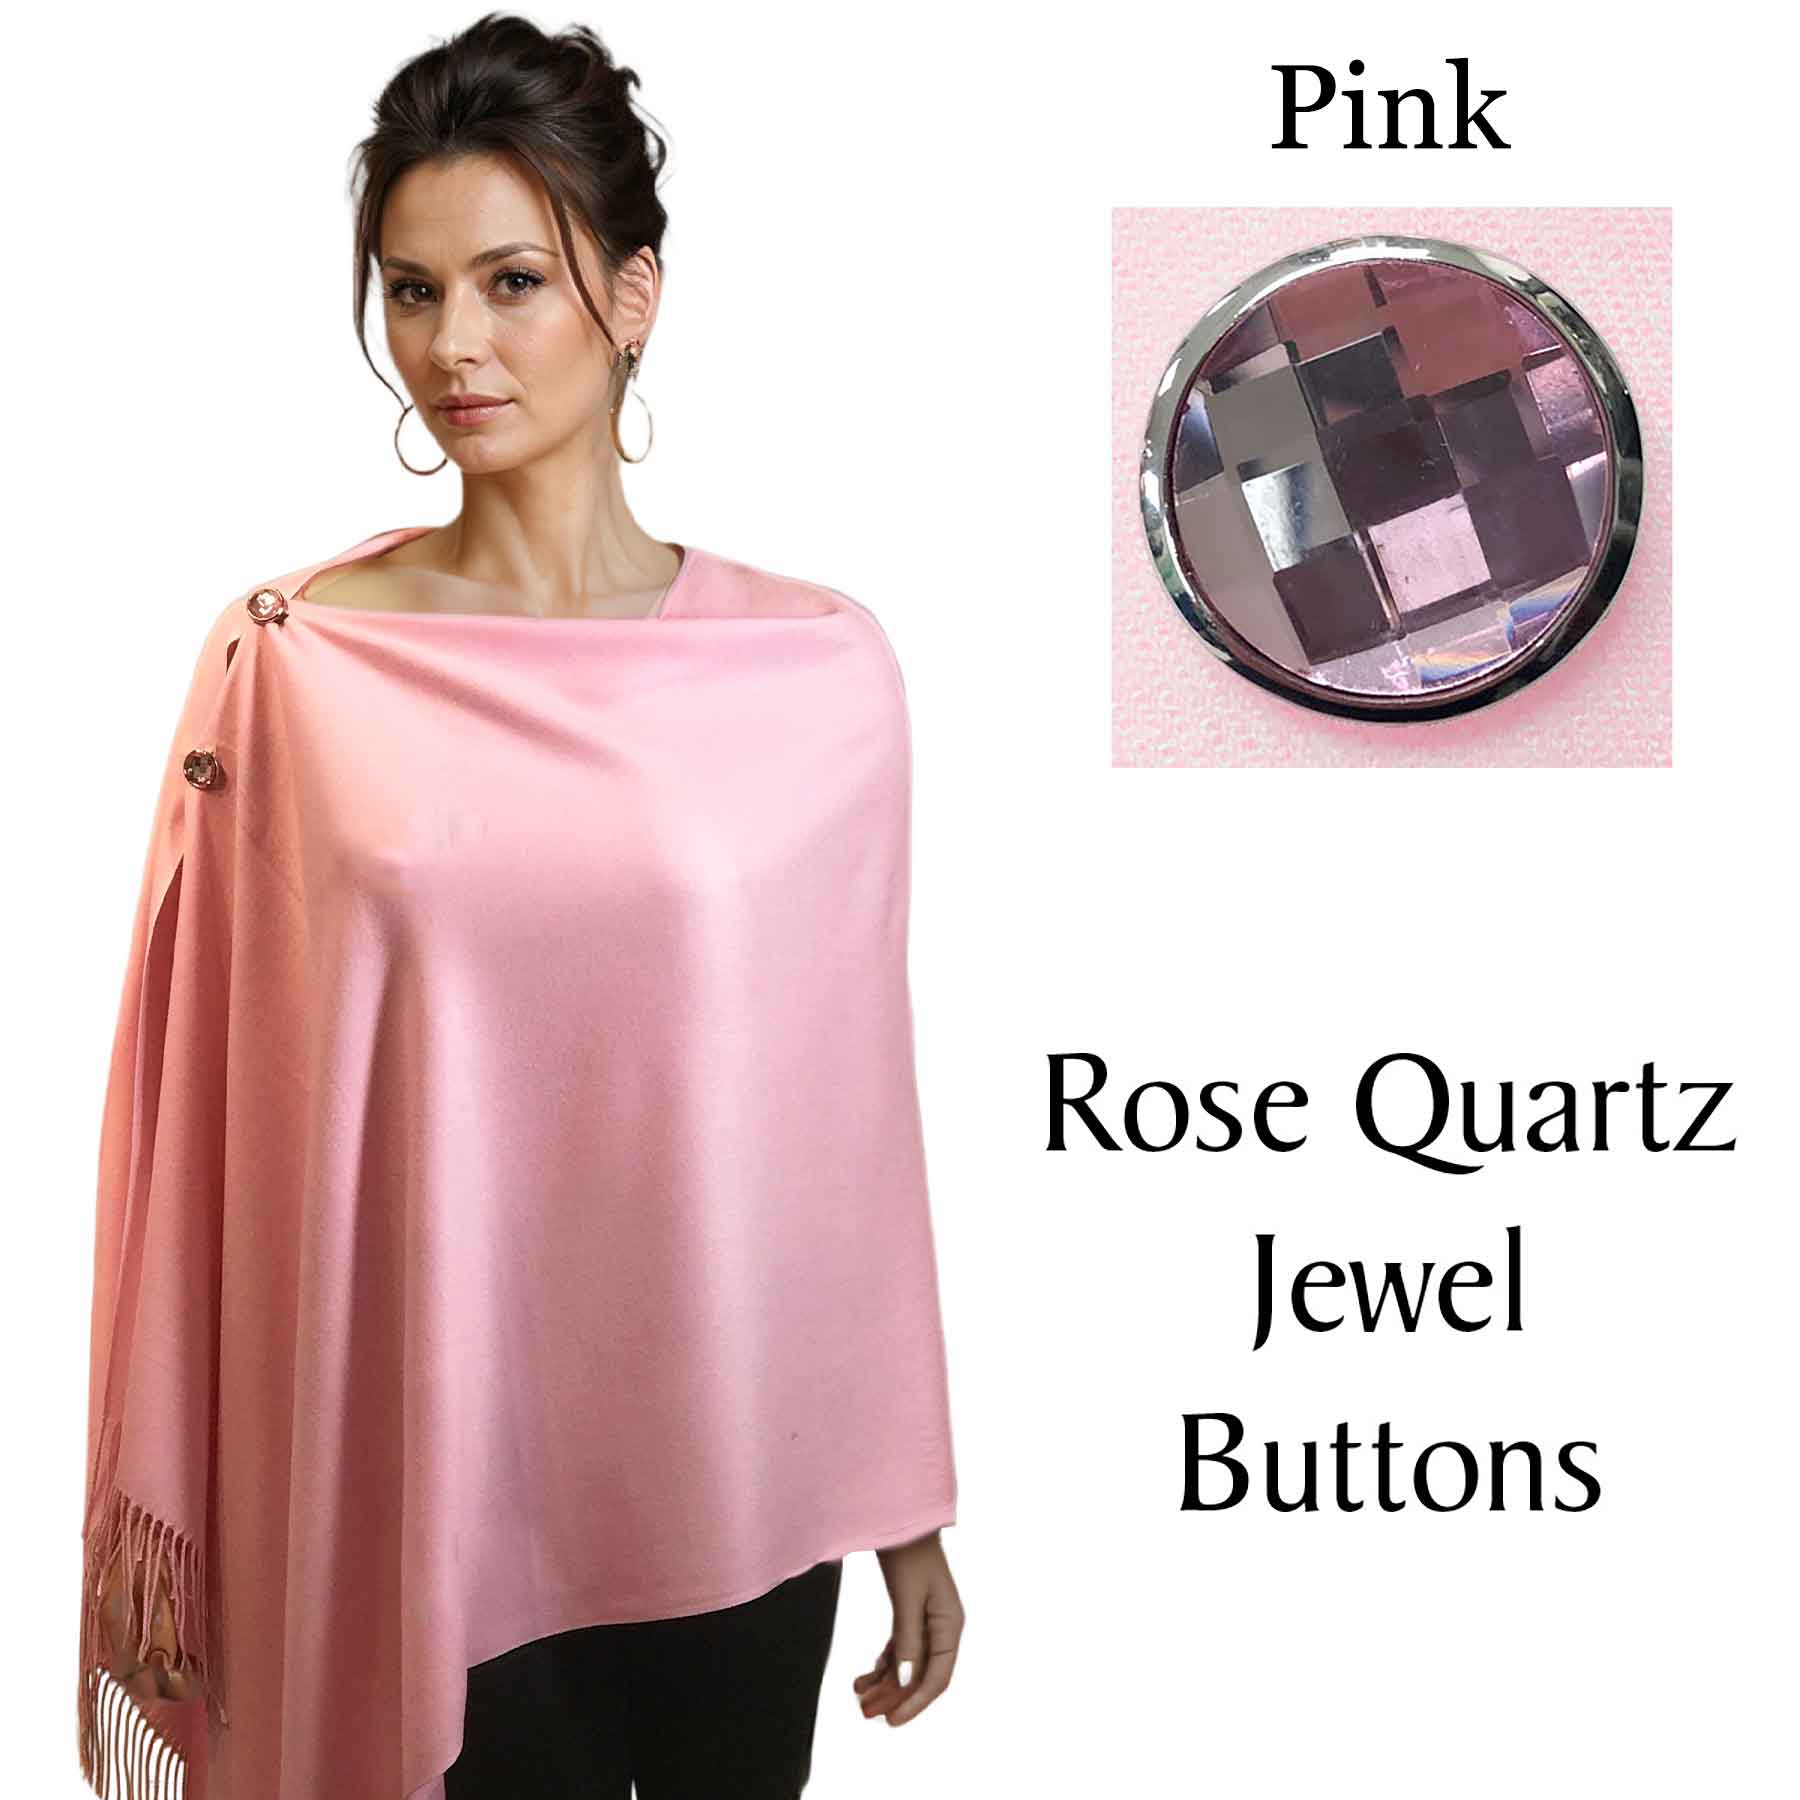 #15 Pink with Rose Quartz Jewel Buttons